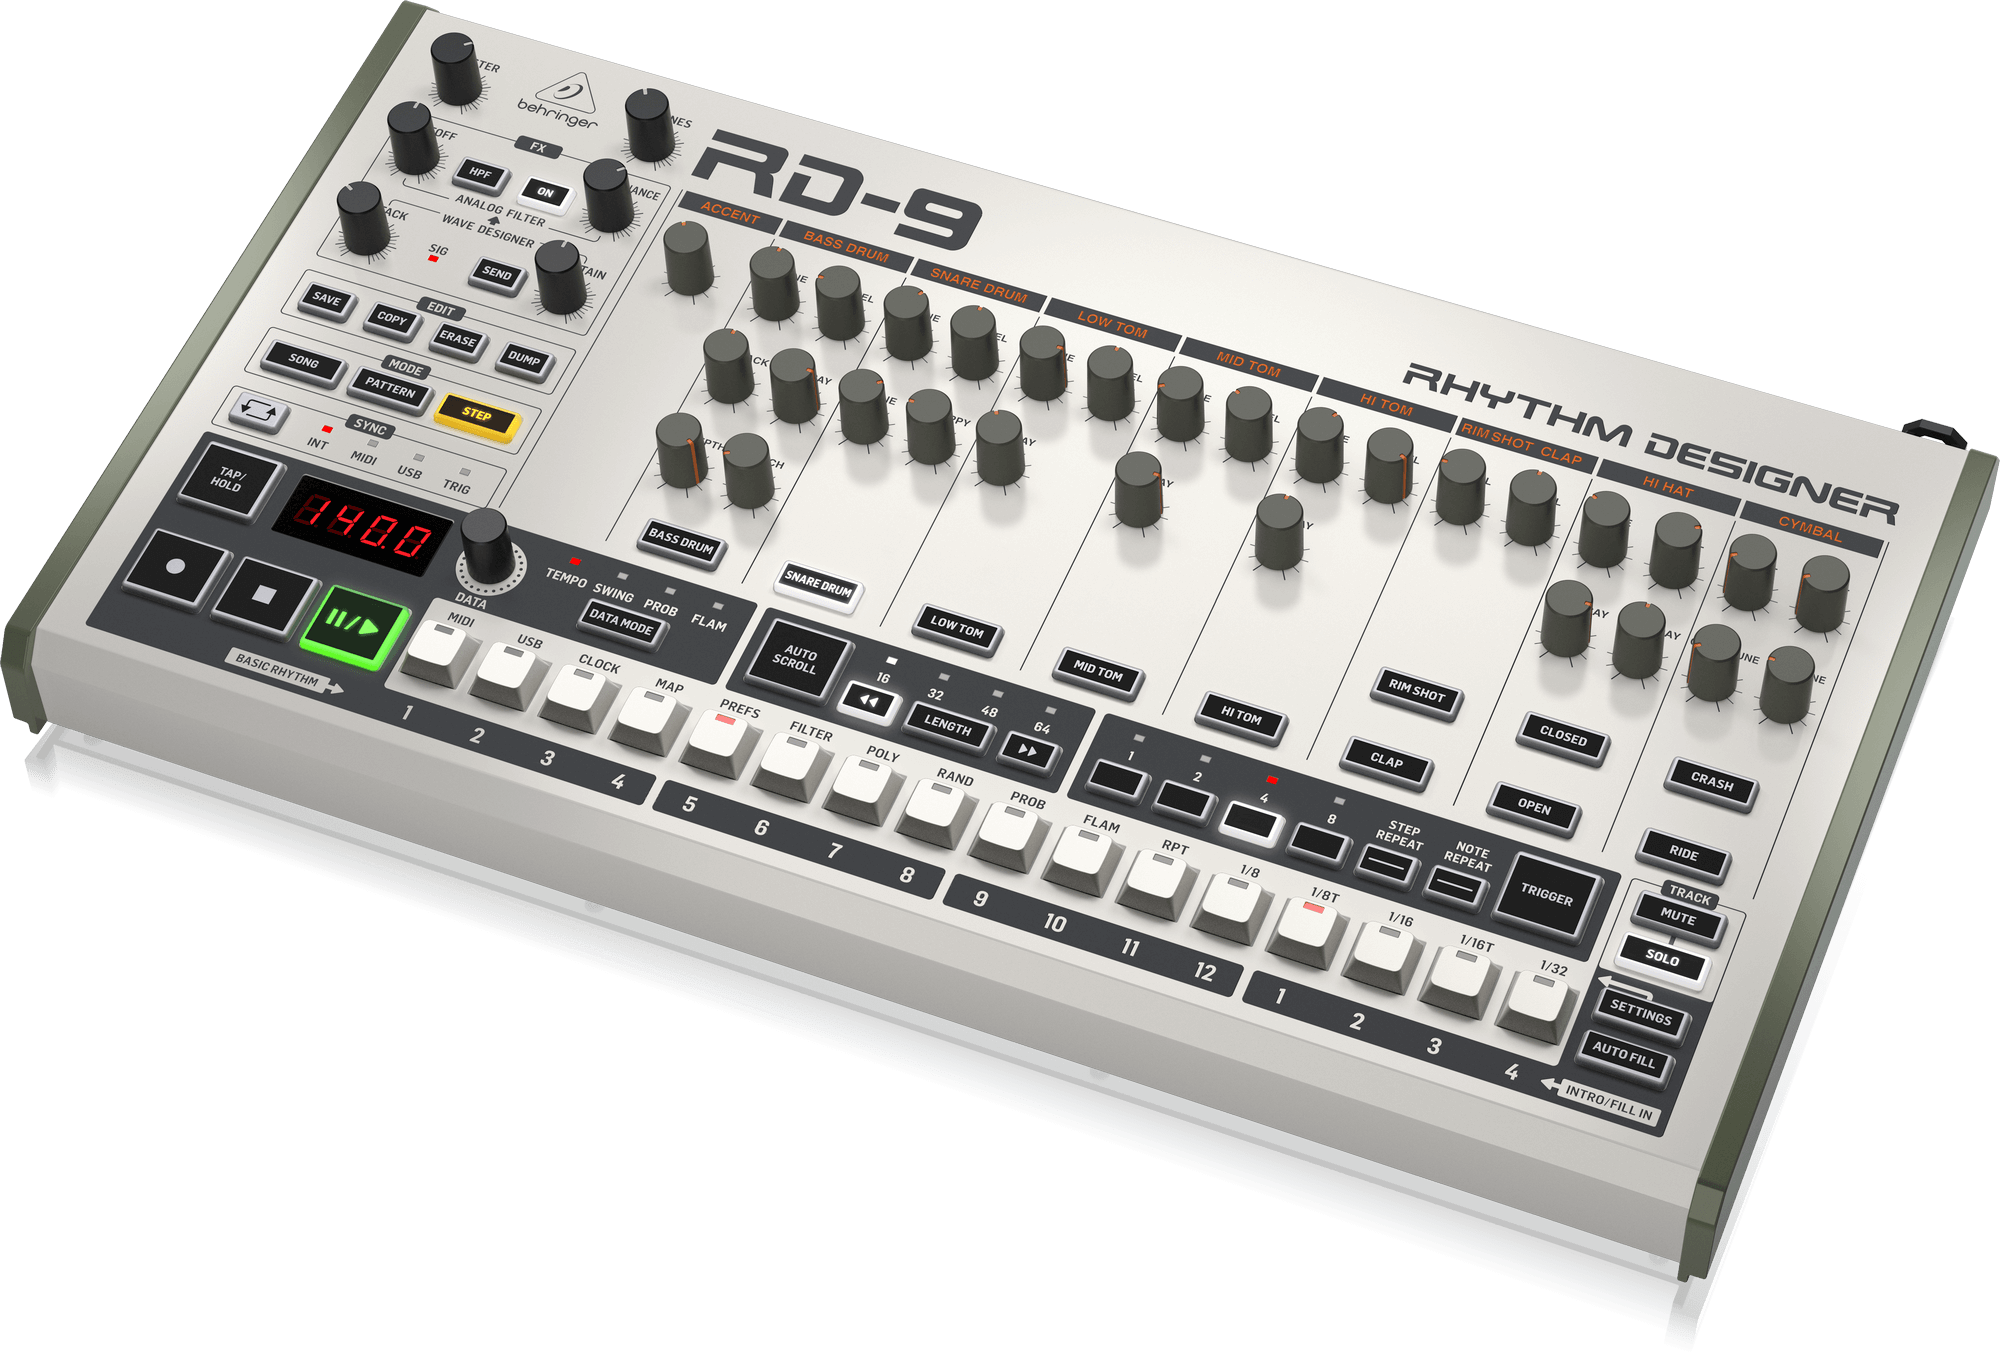 Behringer | Product | RD-9